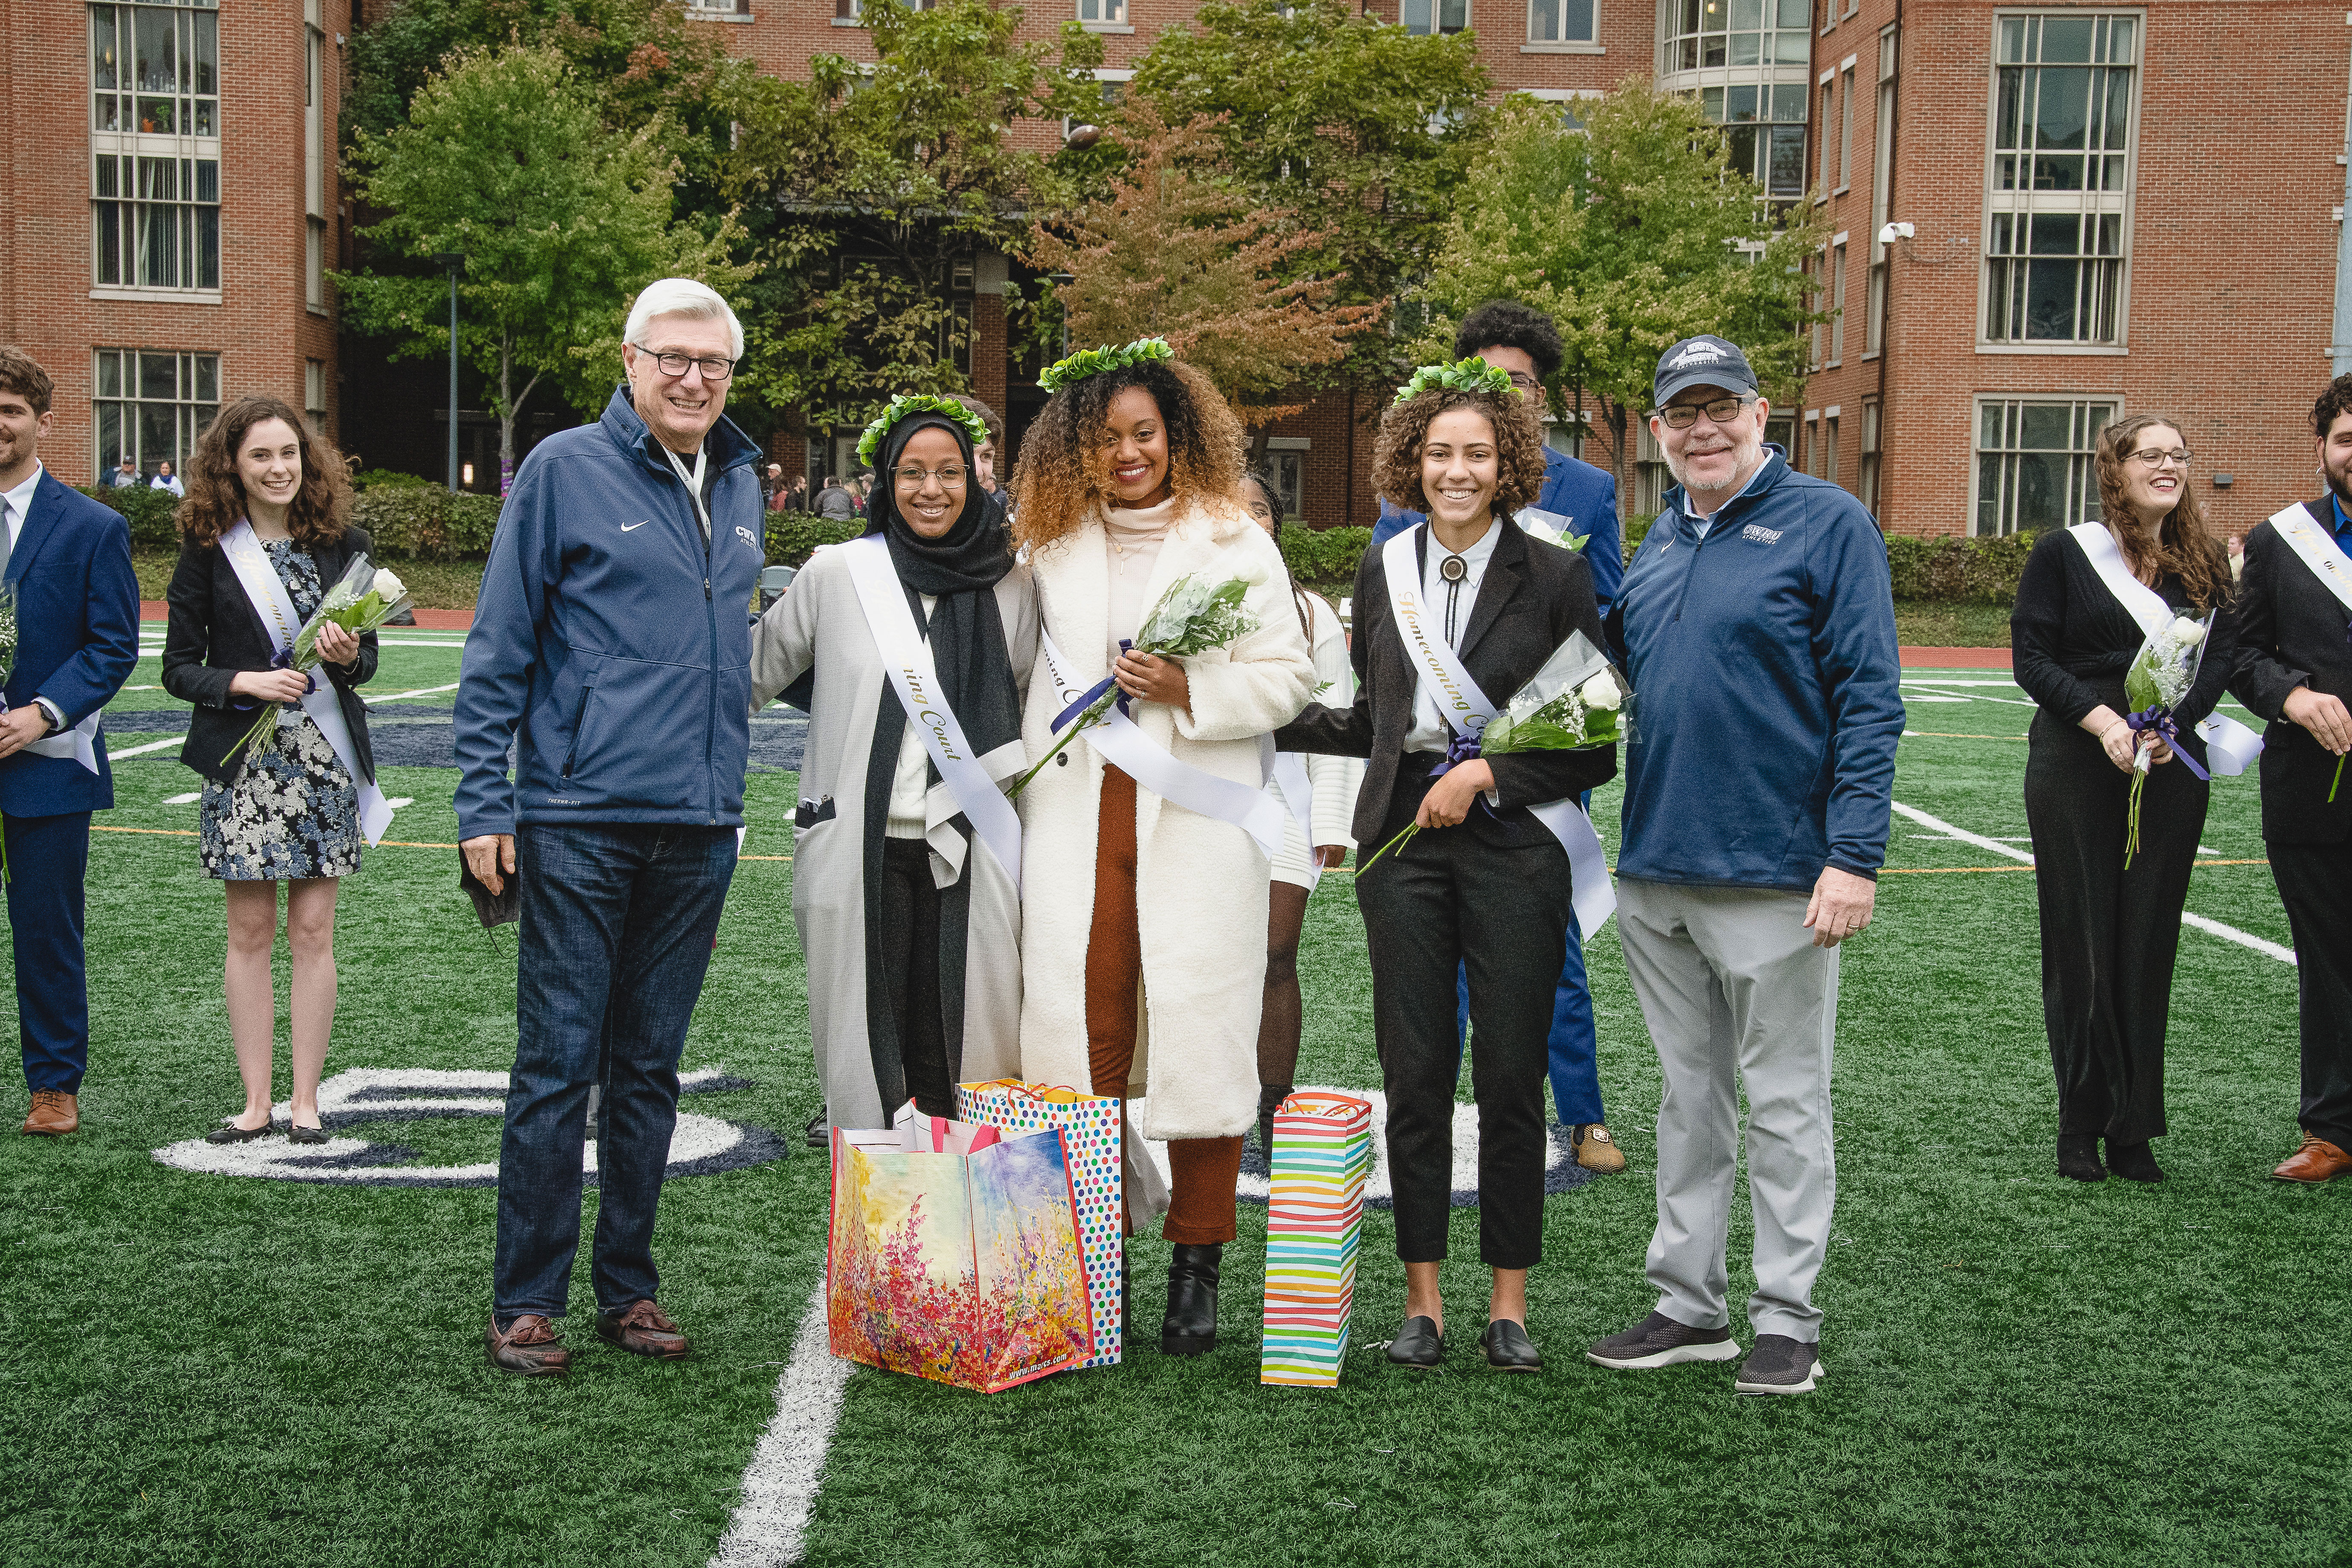 Lou Stark and Eric Kaler stand on either side of members of the student
    homecoming court (Yageen Queen Hassan, Wintana Eyob and Camille Witt) 